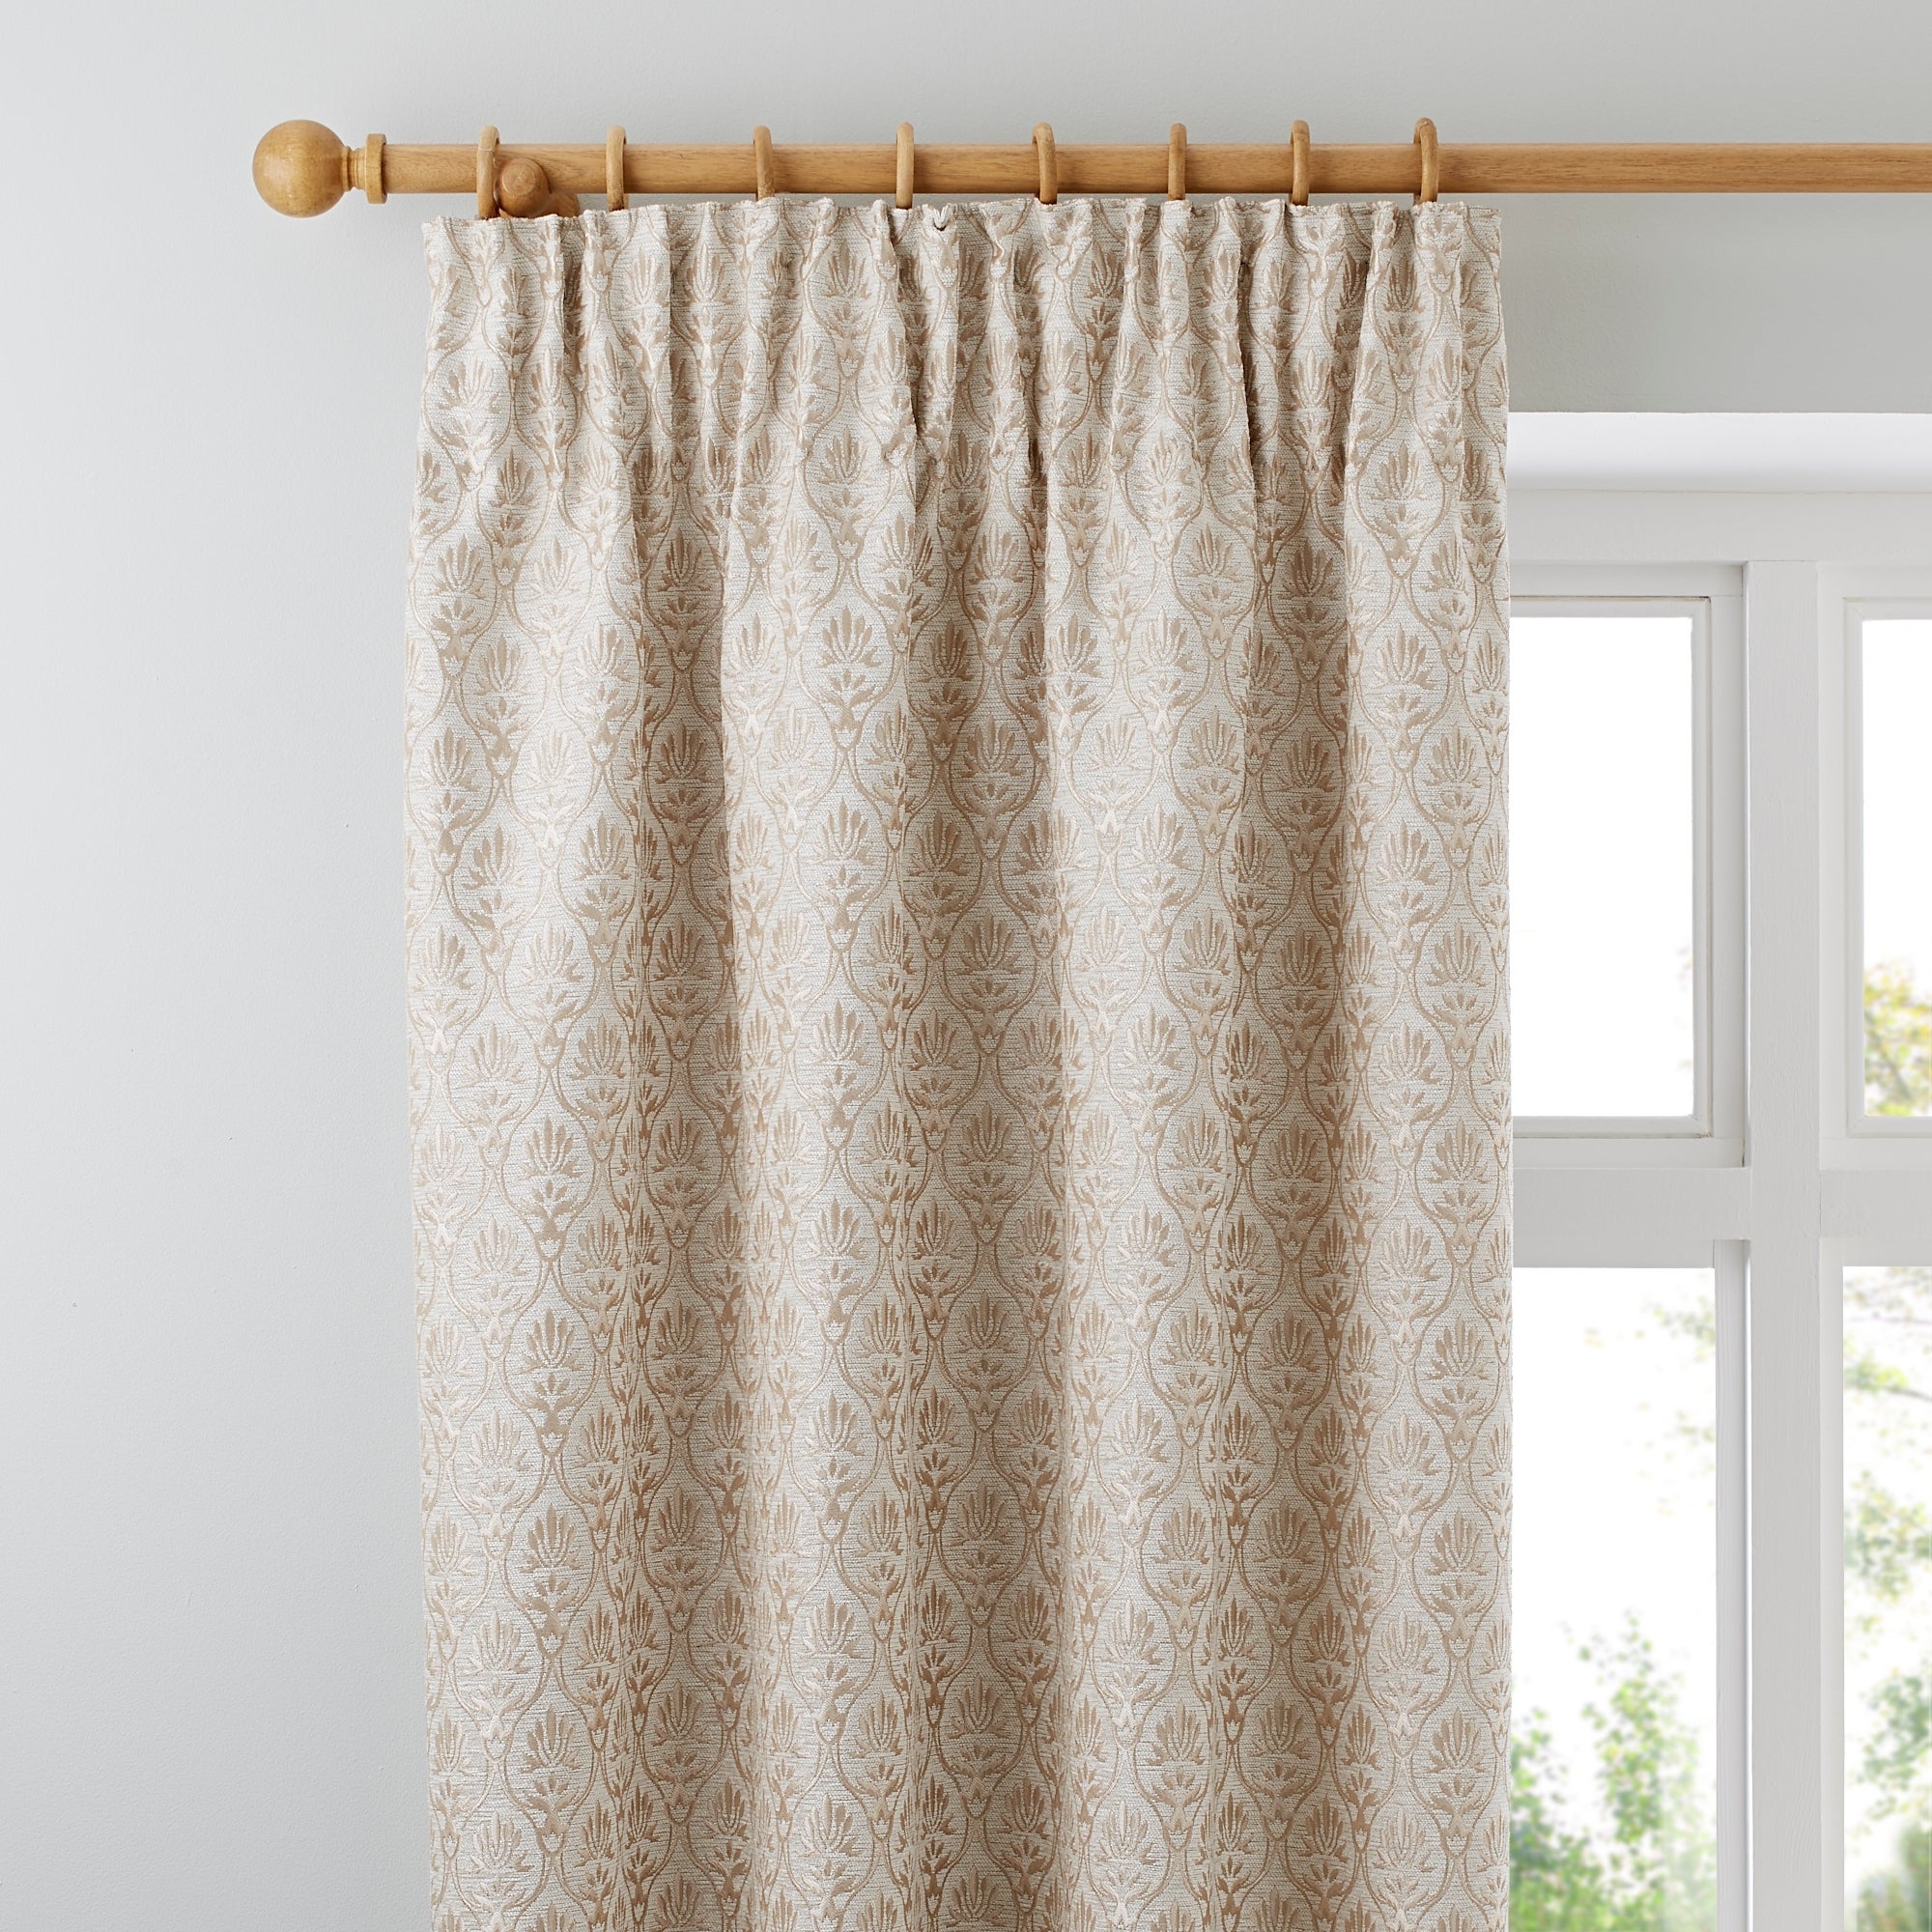 Molly White Pencil Pleat Curtains White By Dunelm, 50% OFF